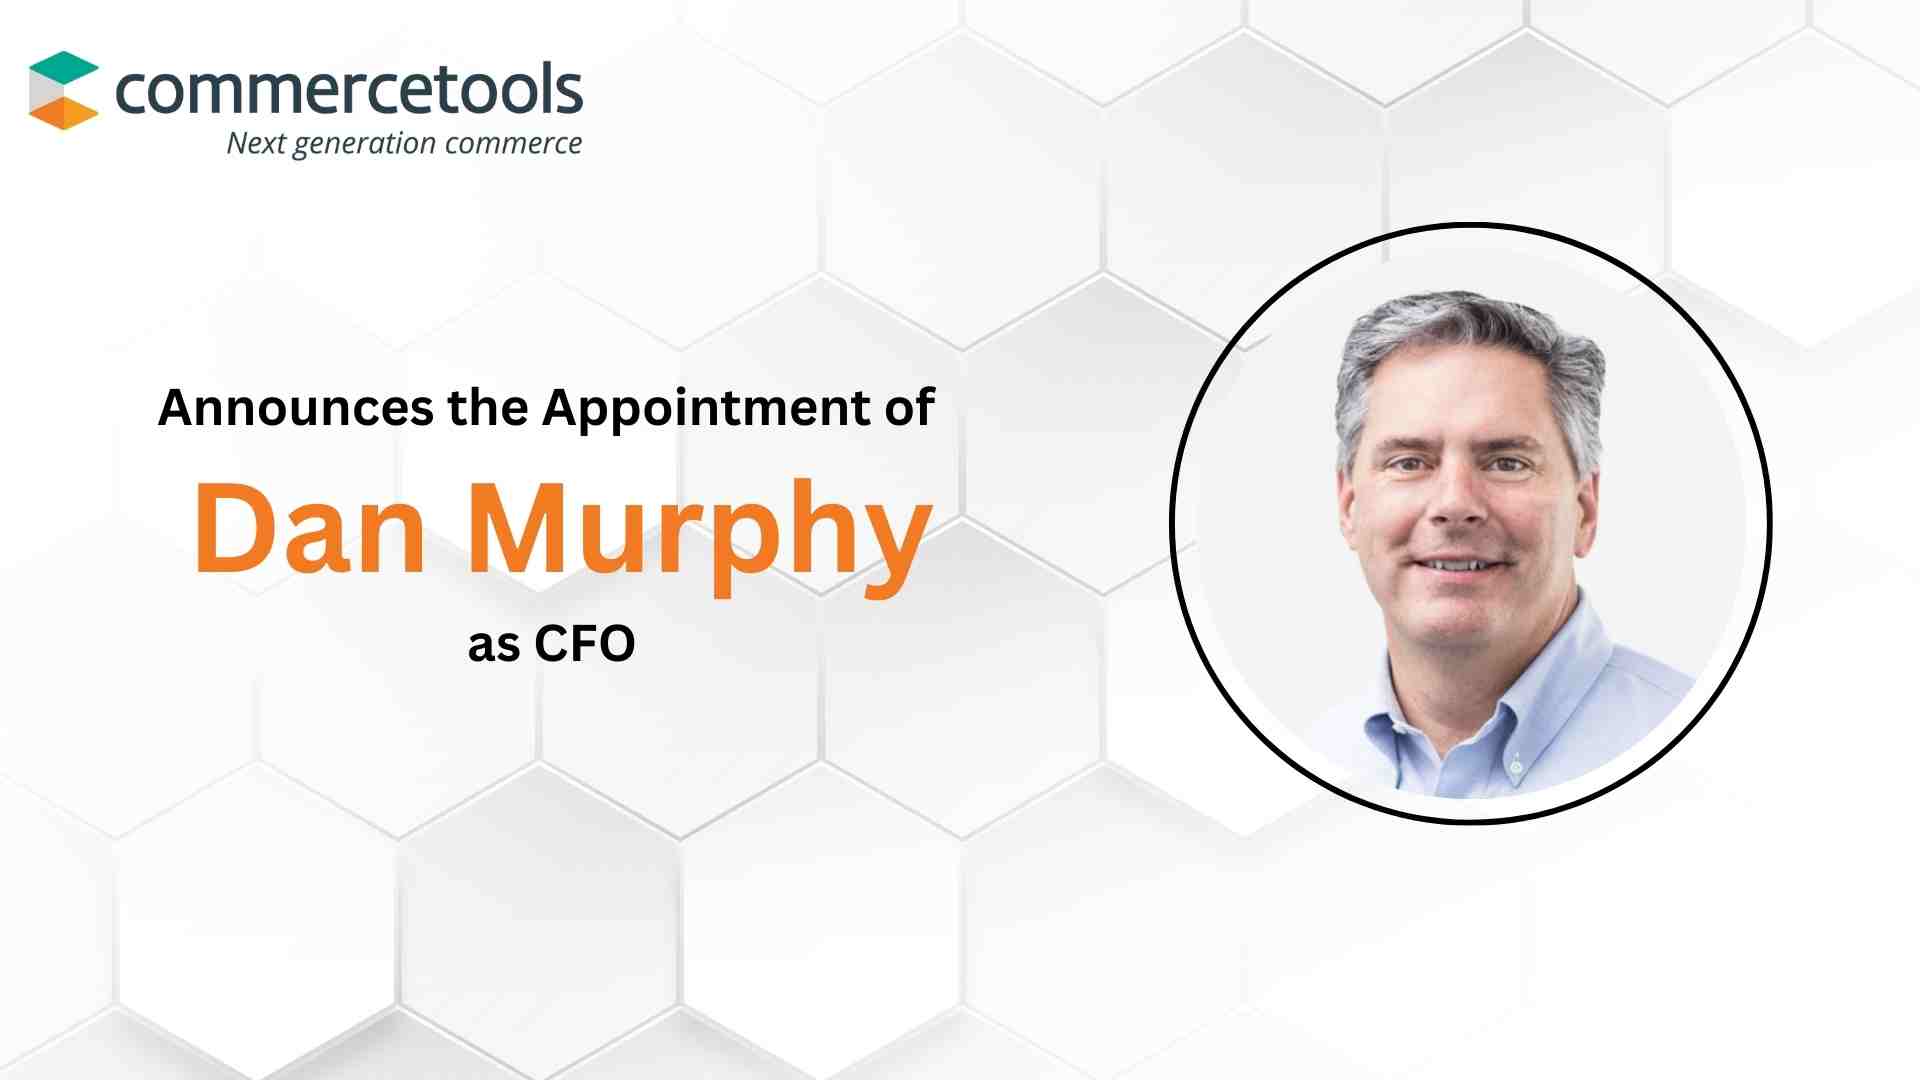 commercetools Announces the Appointment of Dan Murphy as Chief Financial Officer